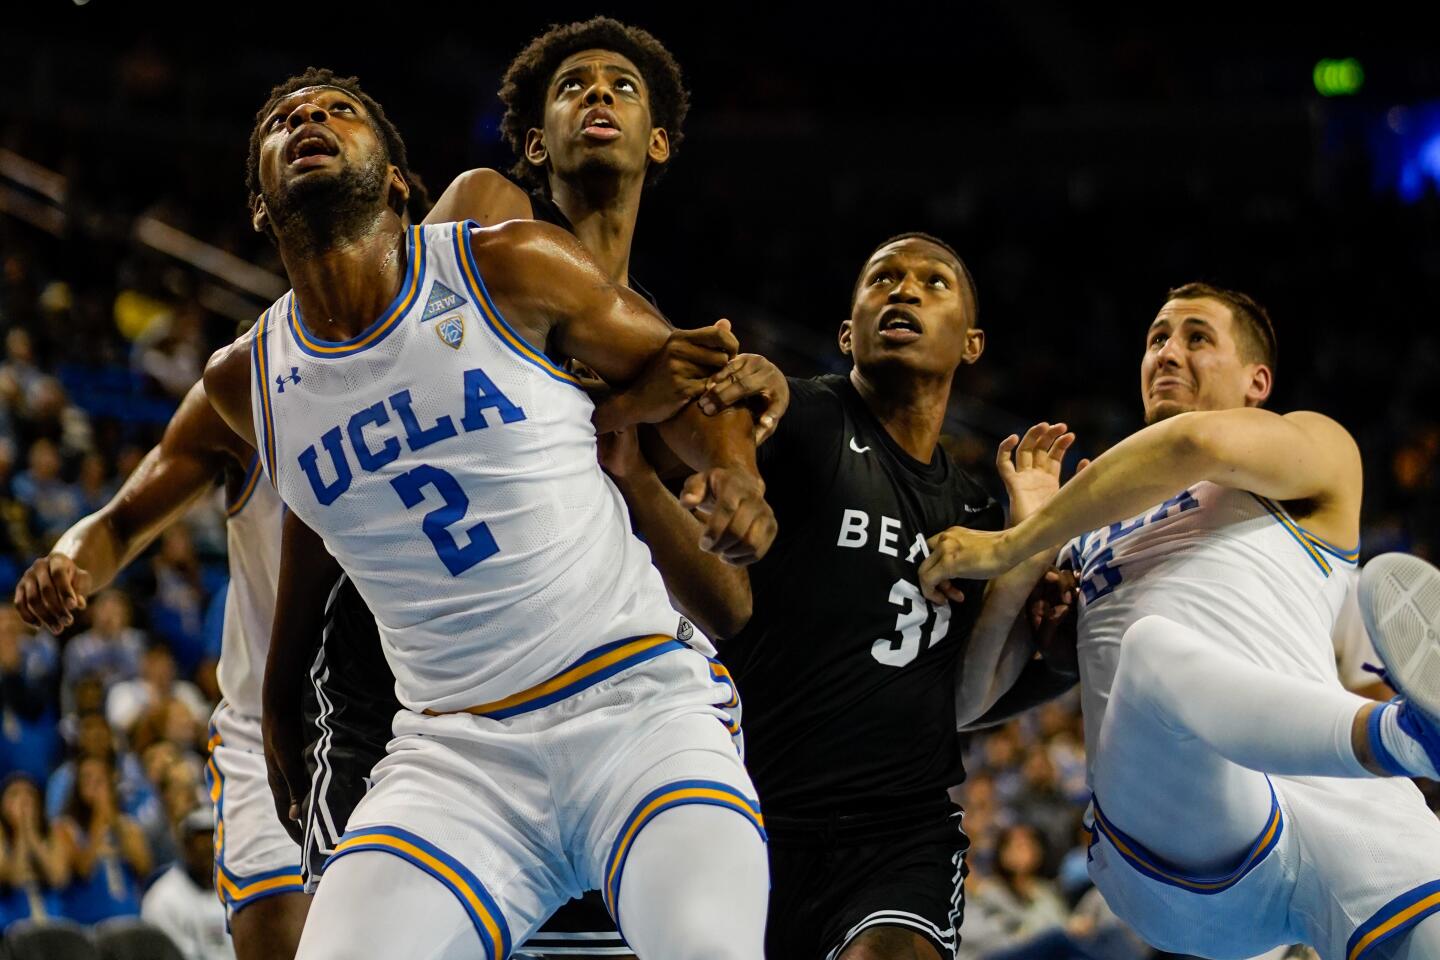 UCLA forward Cody Riley (2) and others watch the ball on a free-throw attempt during the first half of a game Nov. 6 at Pauley Pavilion.